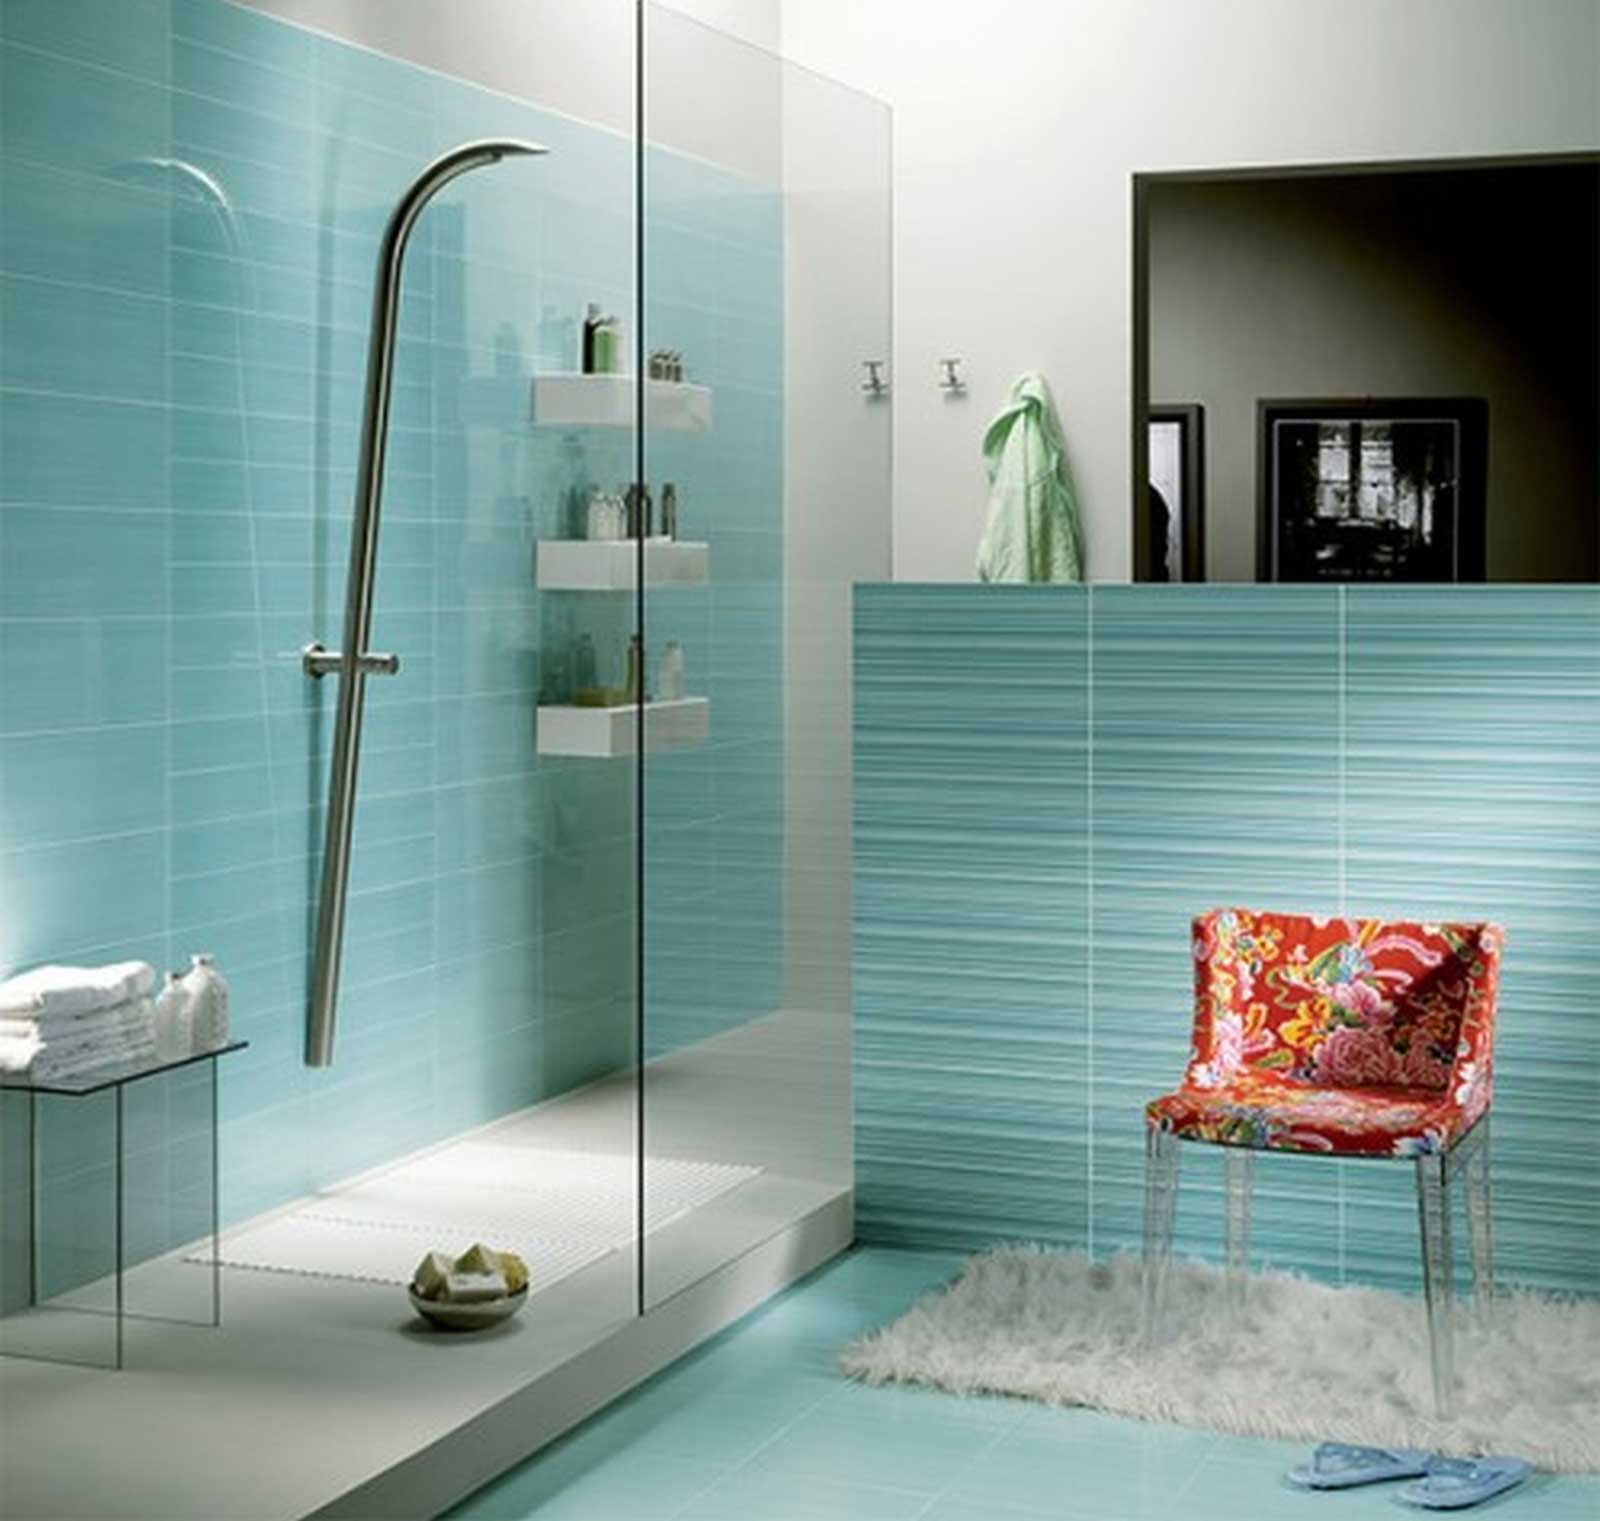 Well Assorted Remodel Awesome Well Assorted Color Bathroom Remodel With Small Colorful Glass Chair Bathroom Furniture Plus Modern Shower Bathroom Remodel Also Bathroom Fur Rug White Color Design Ideas Bathroom The Most Effective Bathroom Remodel: Toilet And Floor